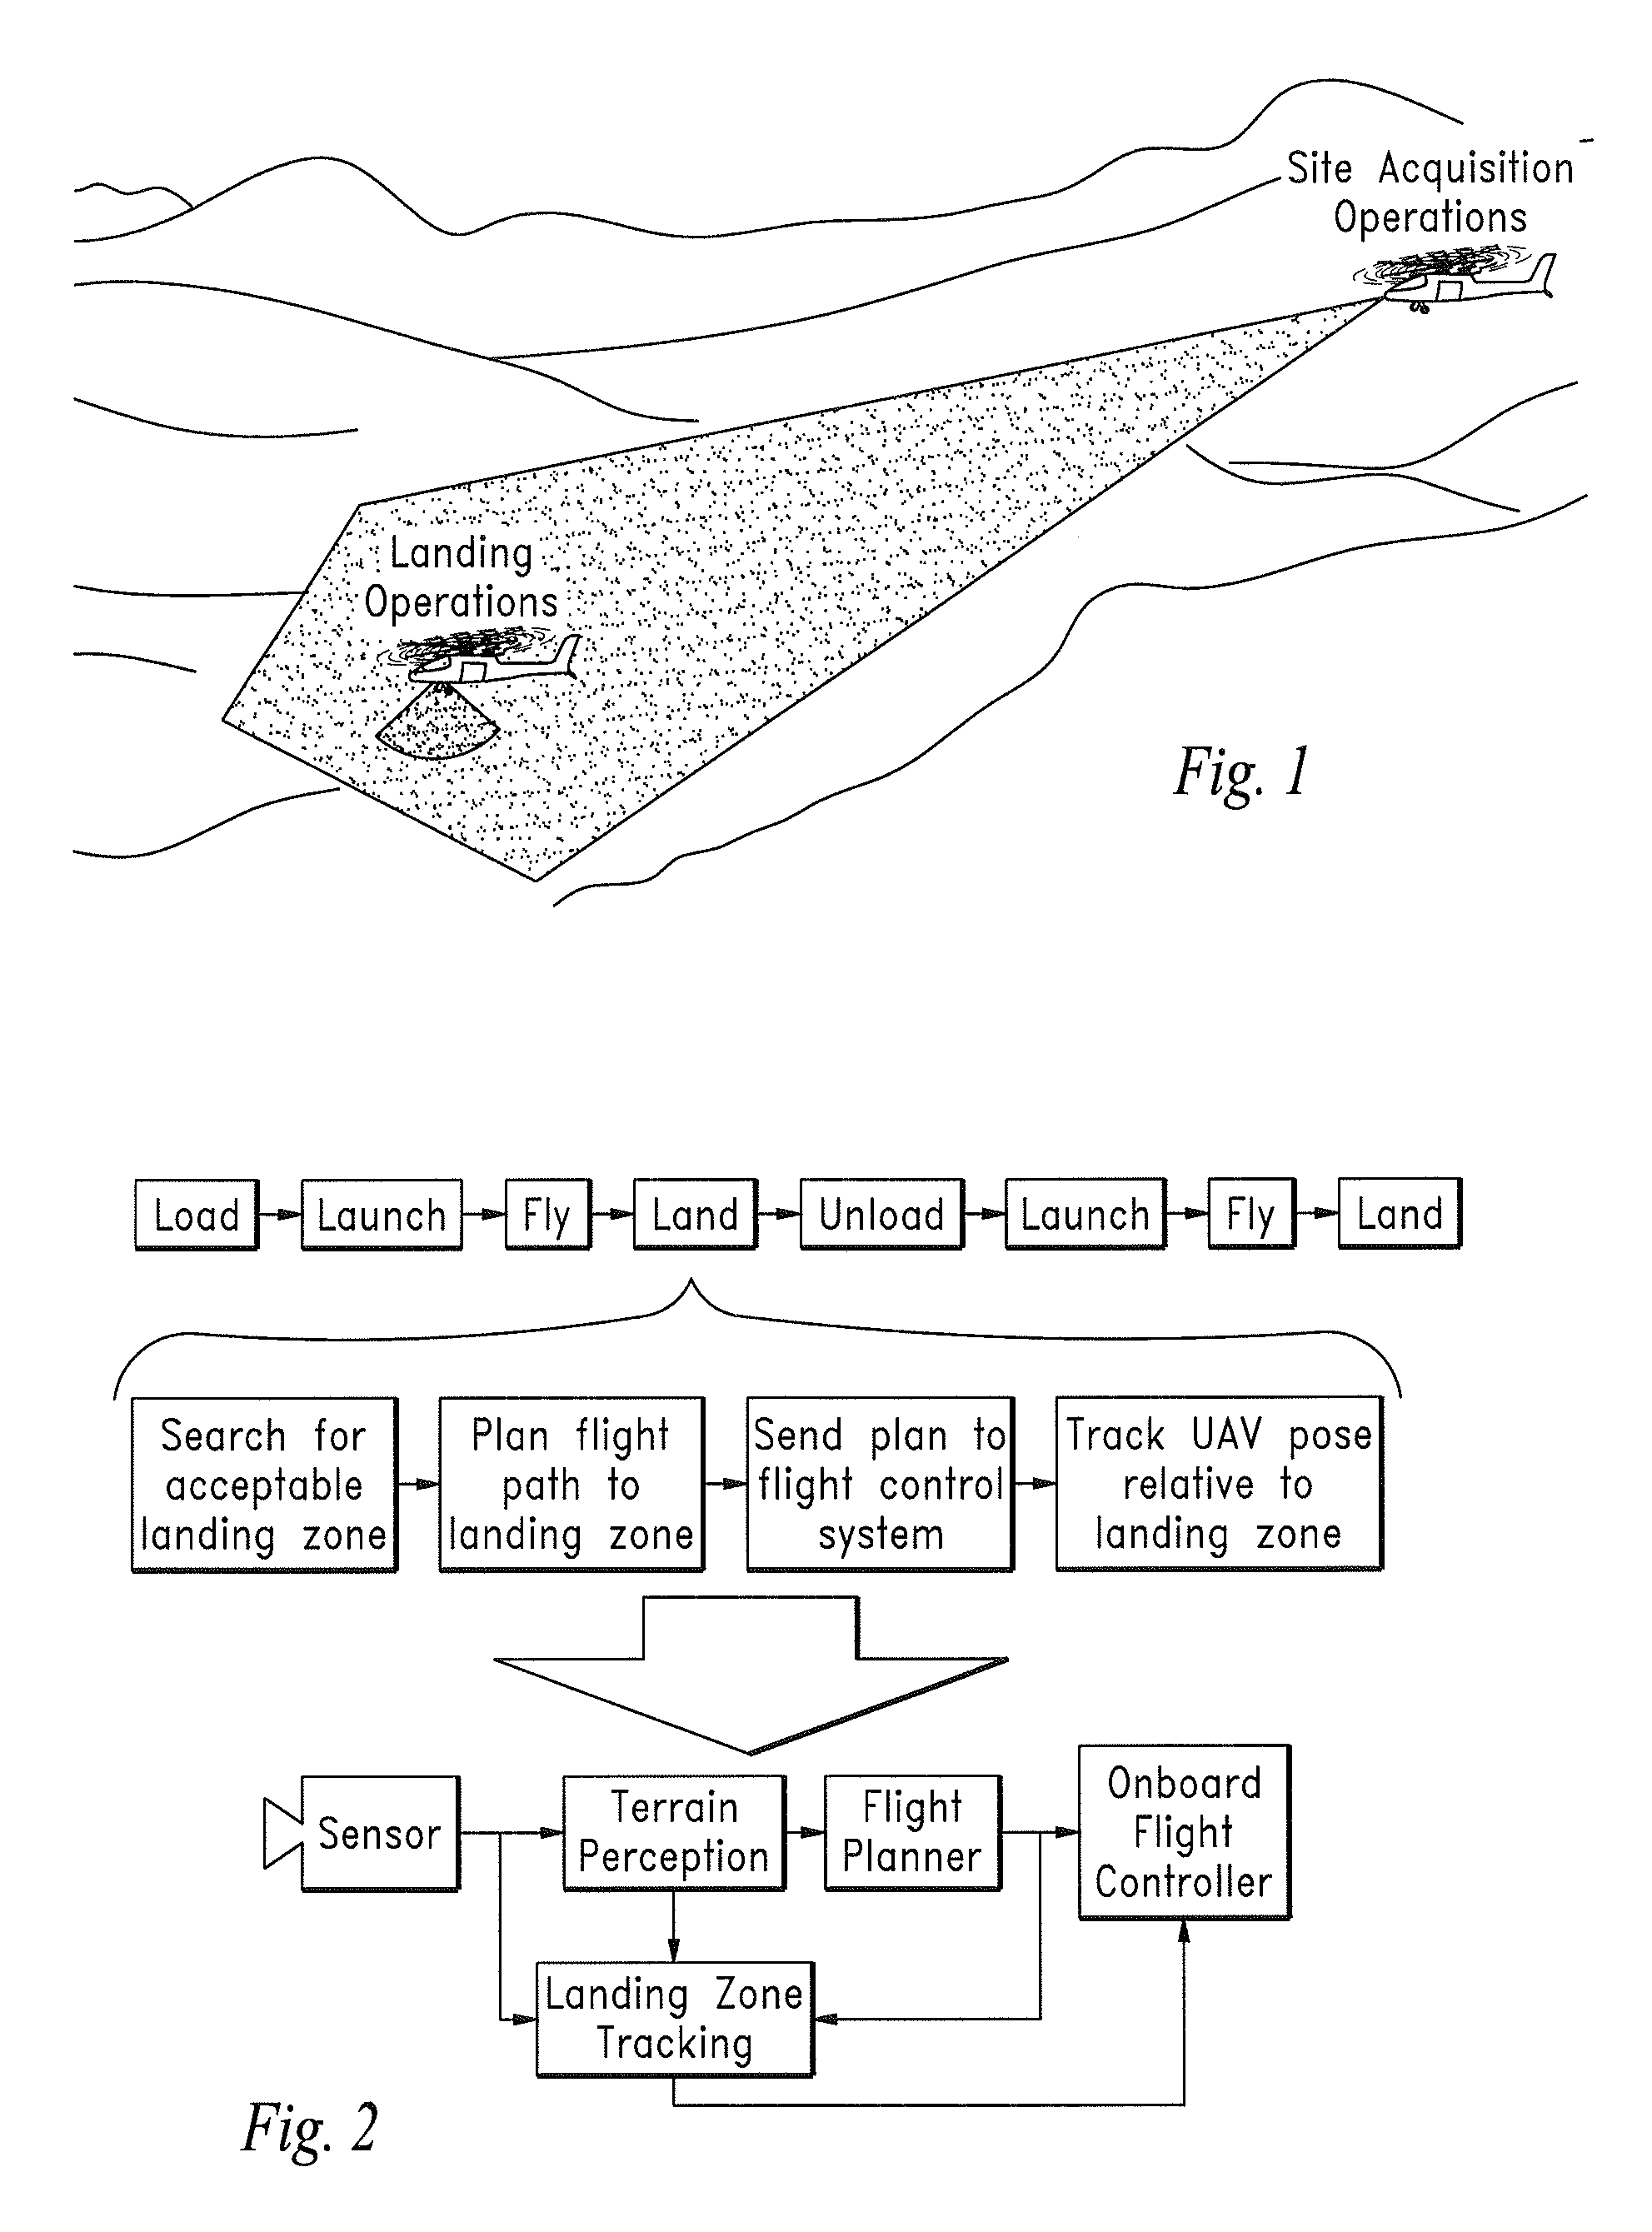 Sensor Element and System Comprising Wide Field-of-View 3-D Imaging LIDAR